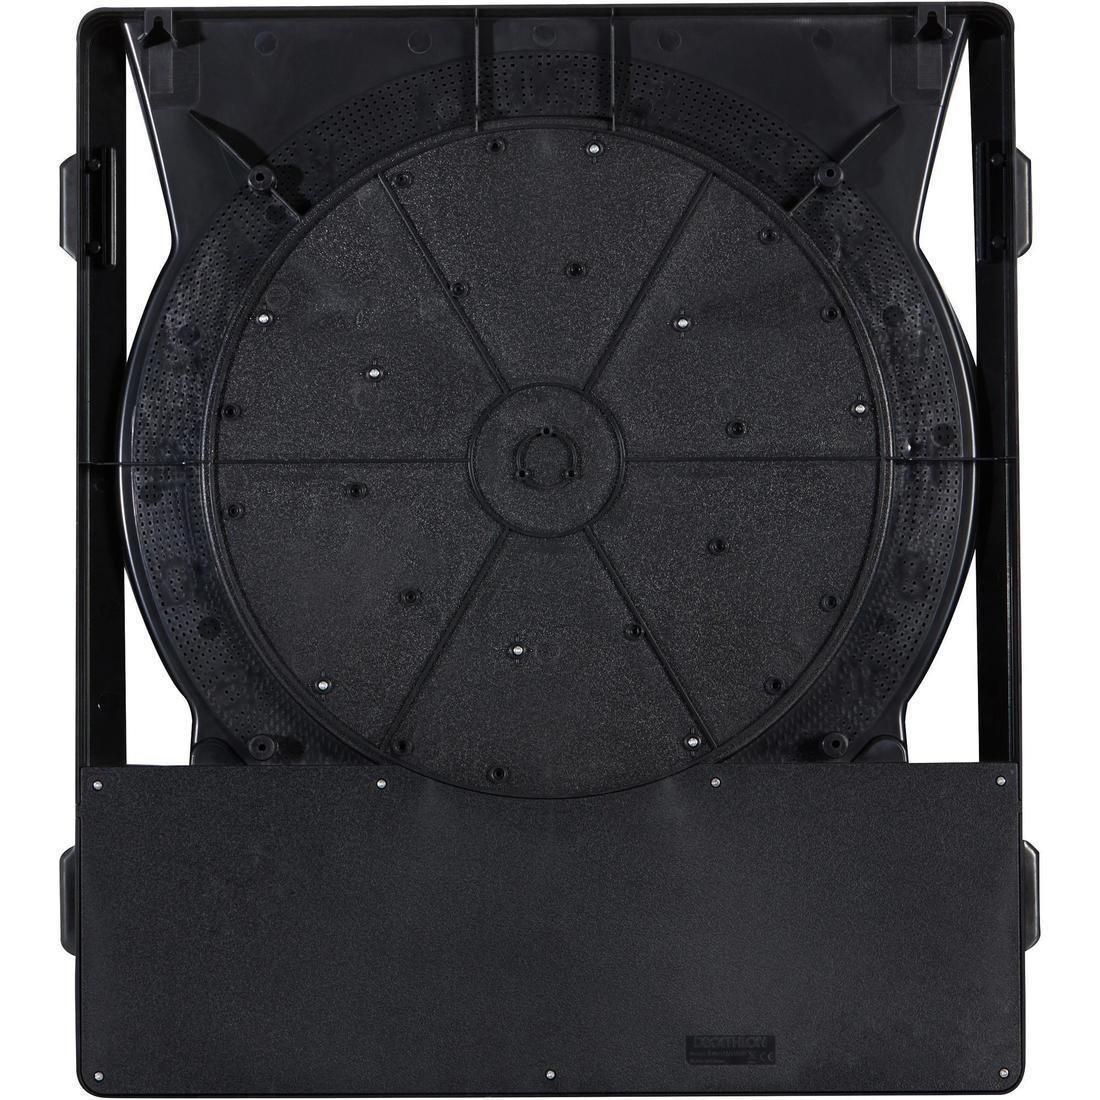 CANAVERAL - Ed520 Electronic Dartboard